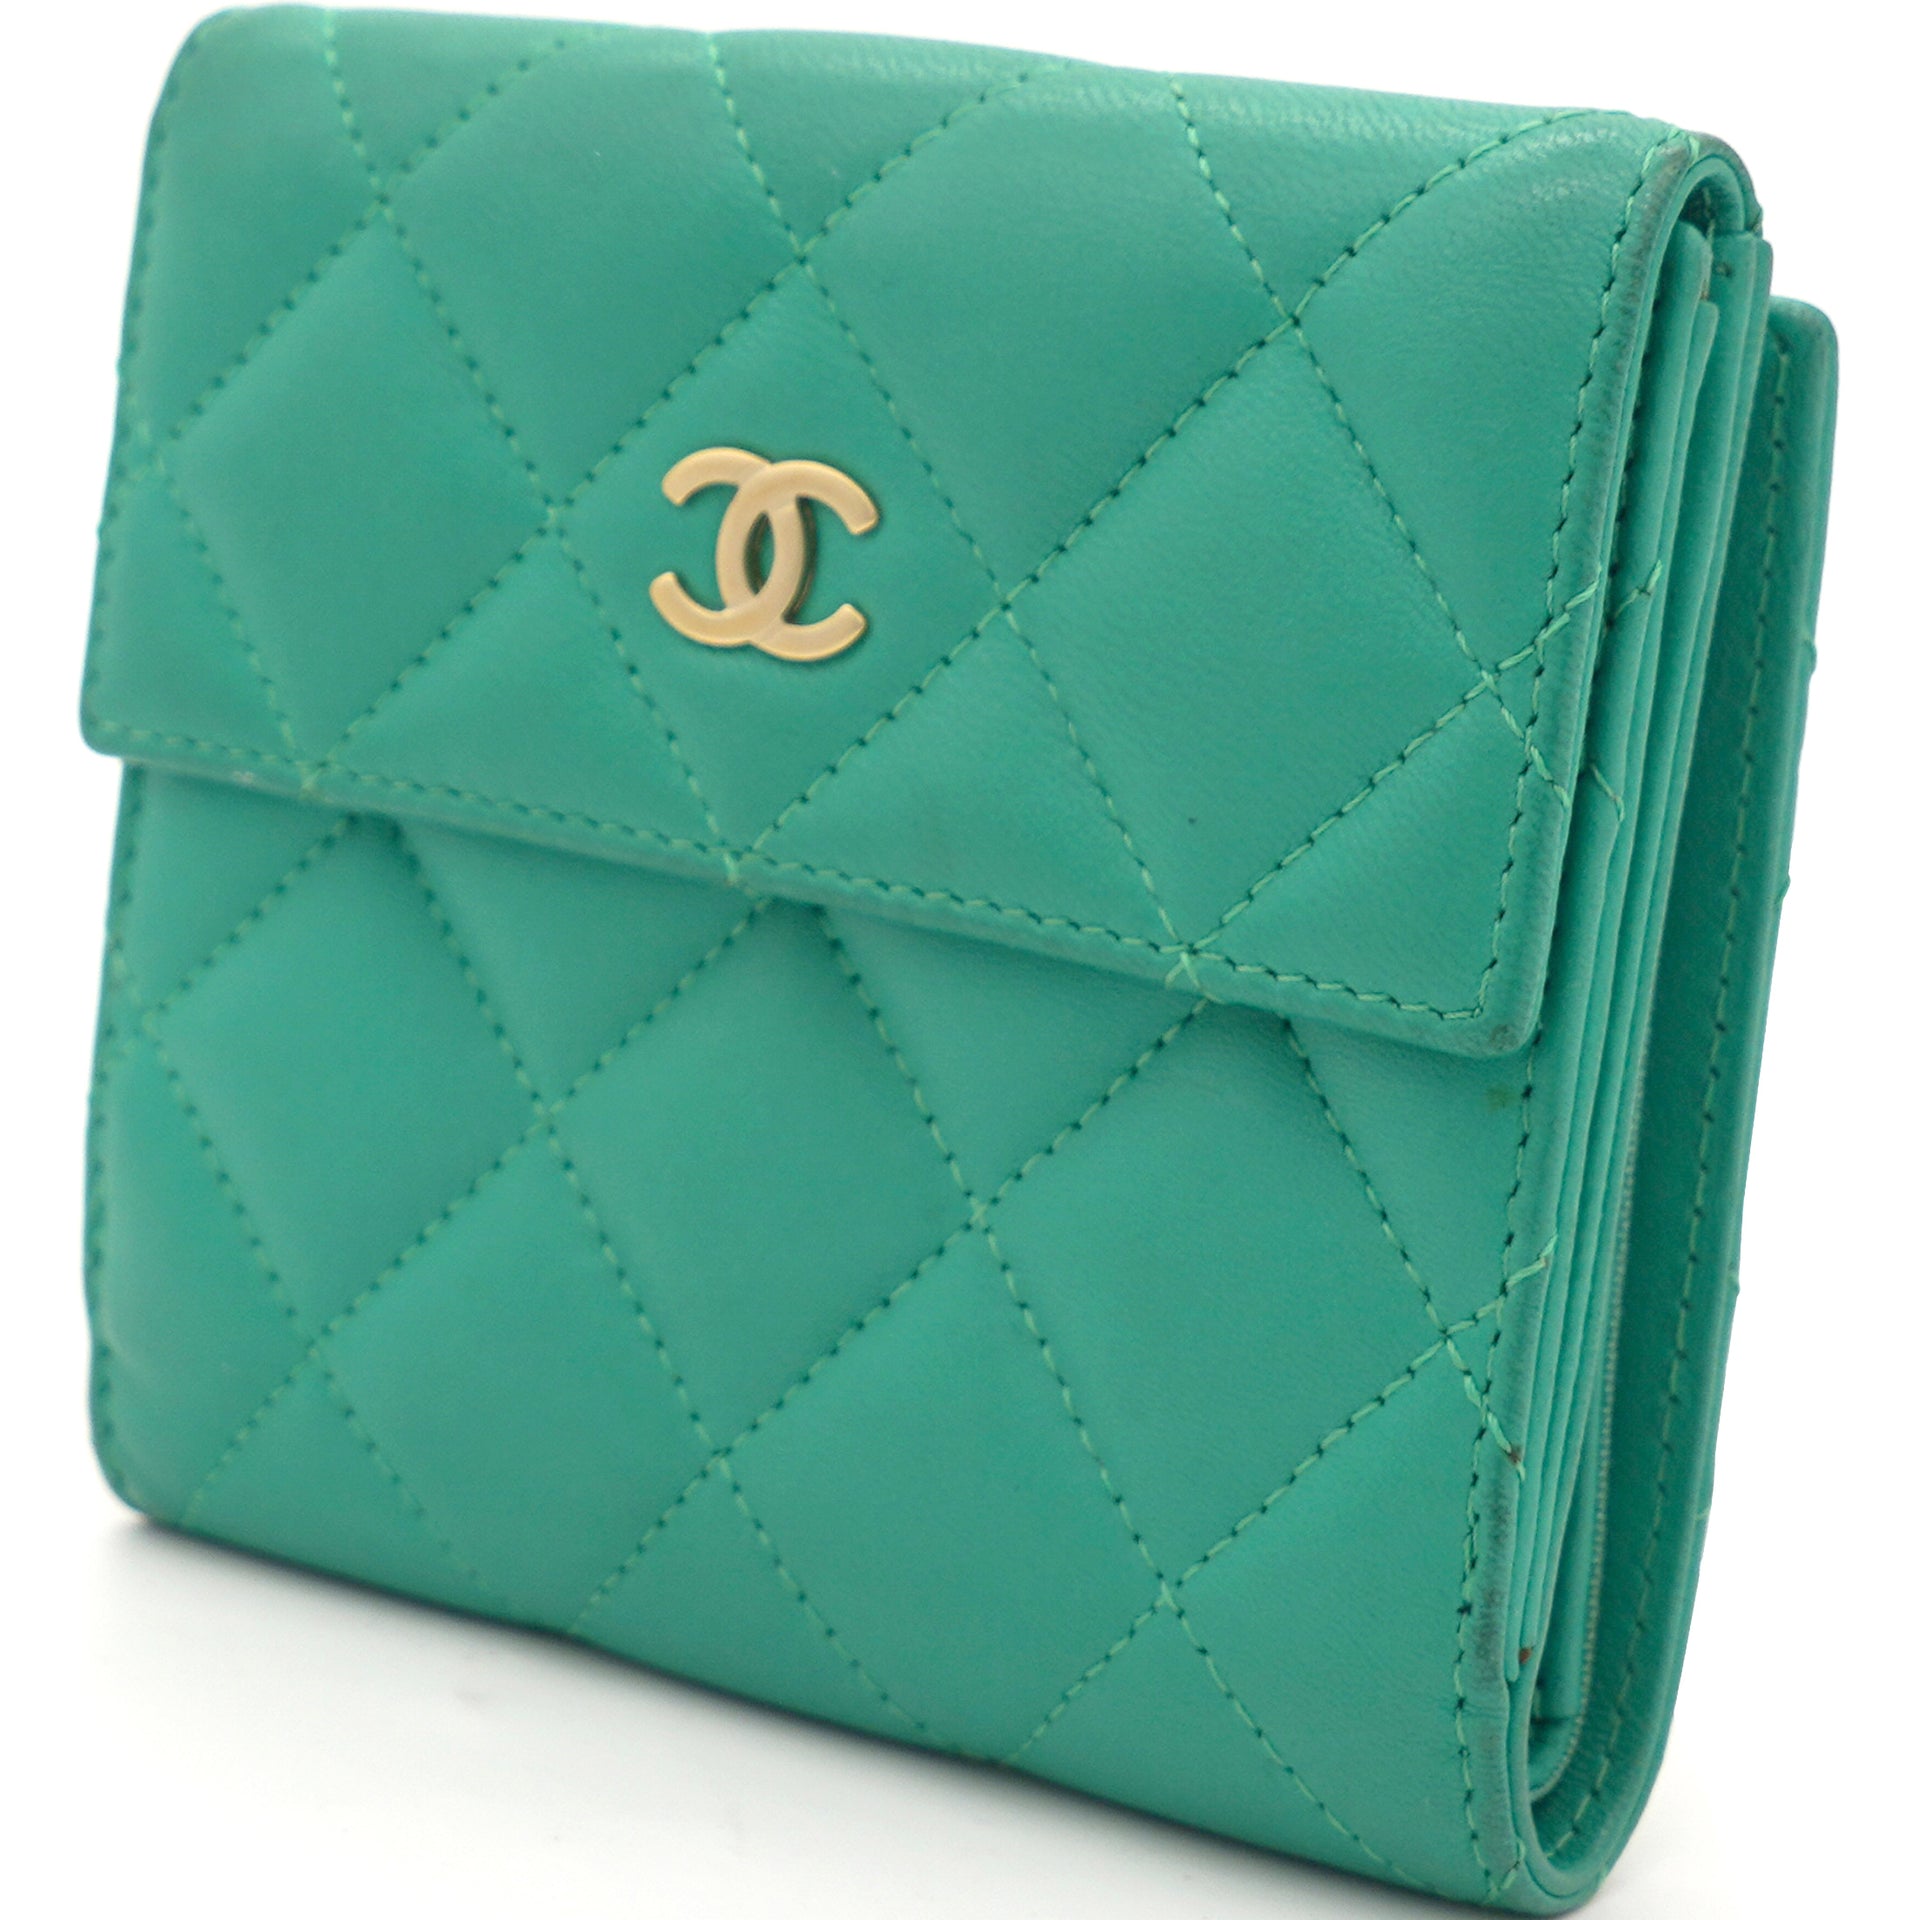 CHANEL CLASSIC SMALL FLPA WALLET